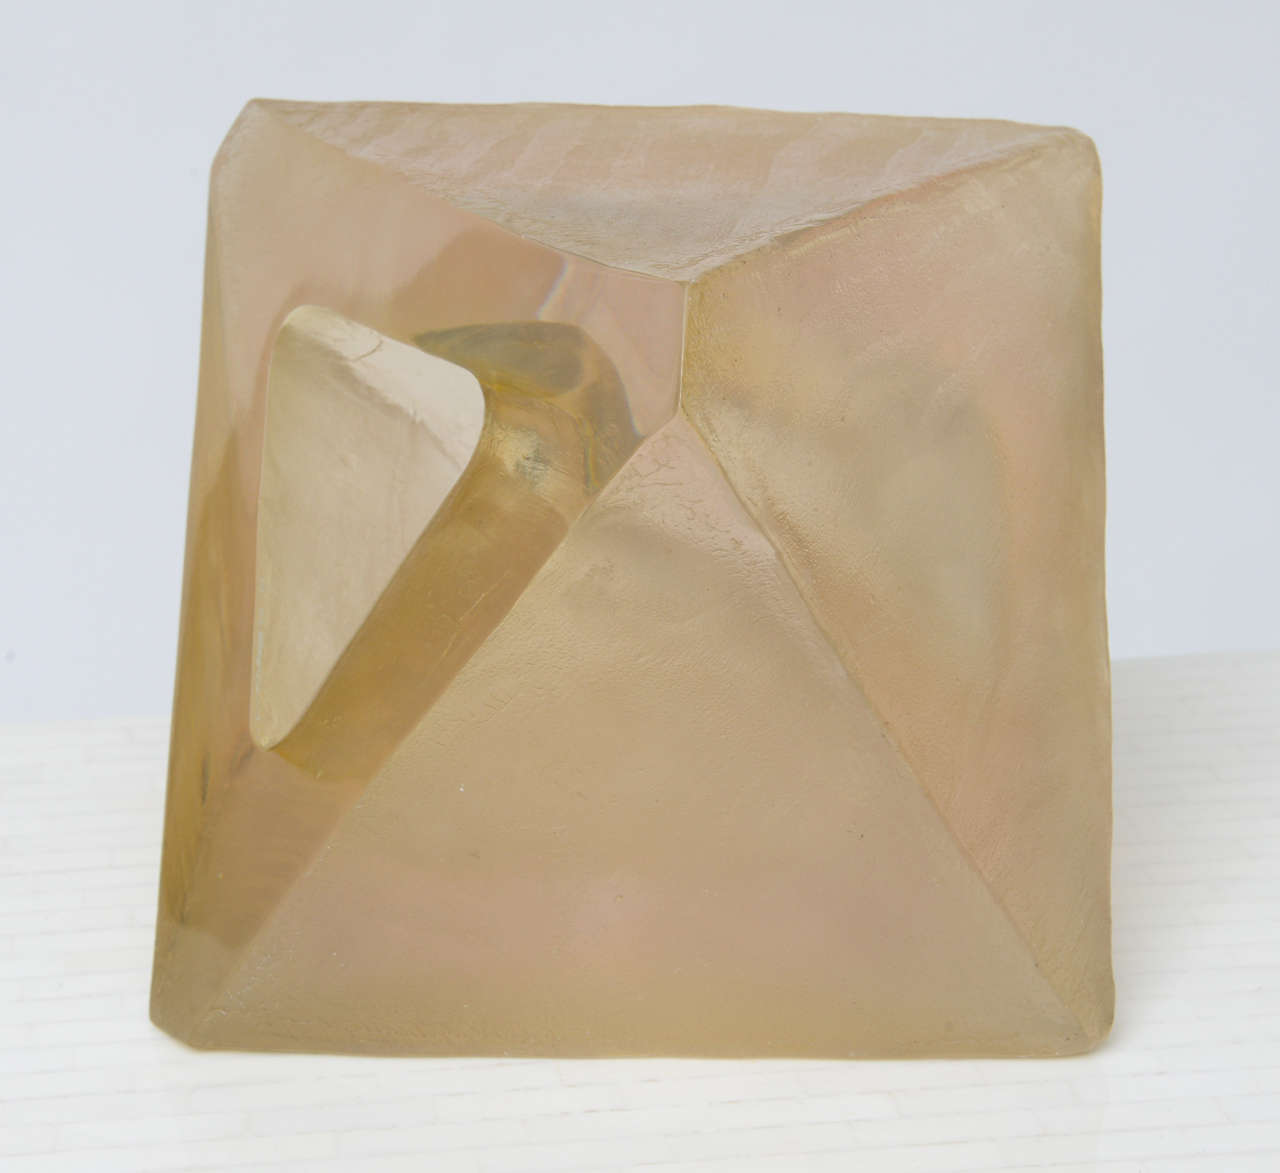 Late 20th Century Polyhedral Resin Sculpture